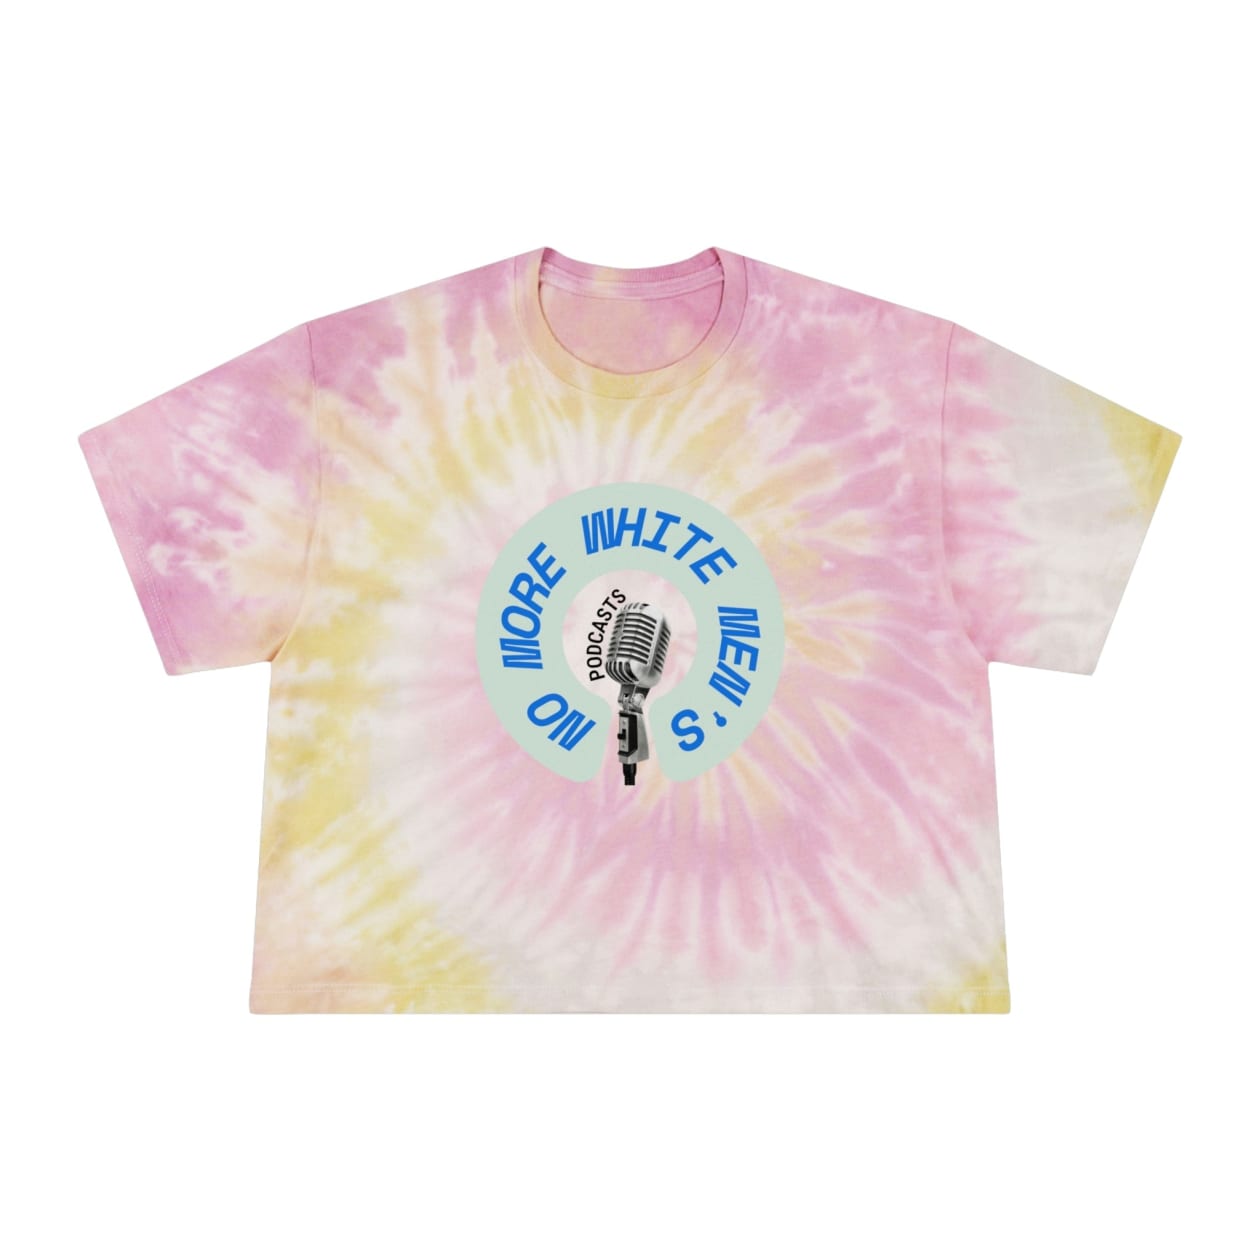 No More White Men's Podcasts Women's Tie-Dye Crop Tee - Color: Desert Rose, Size: XS